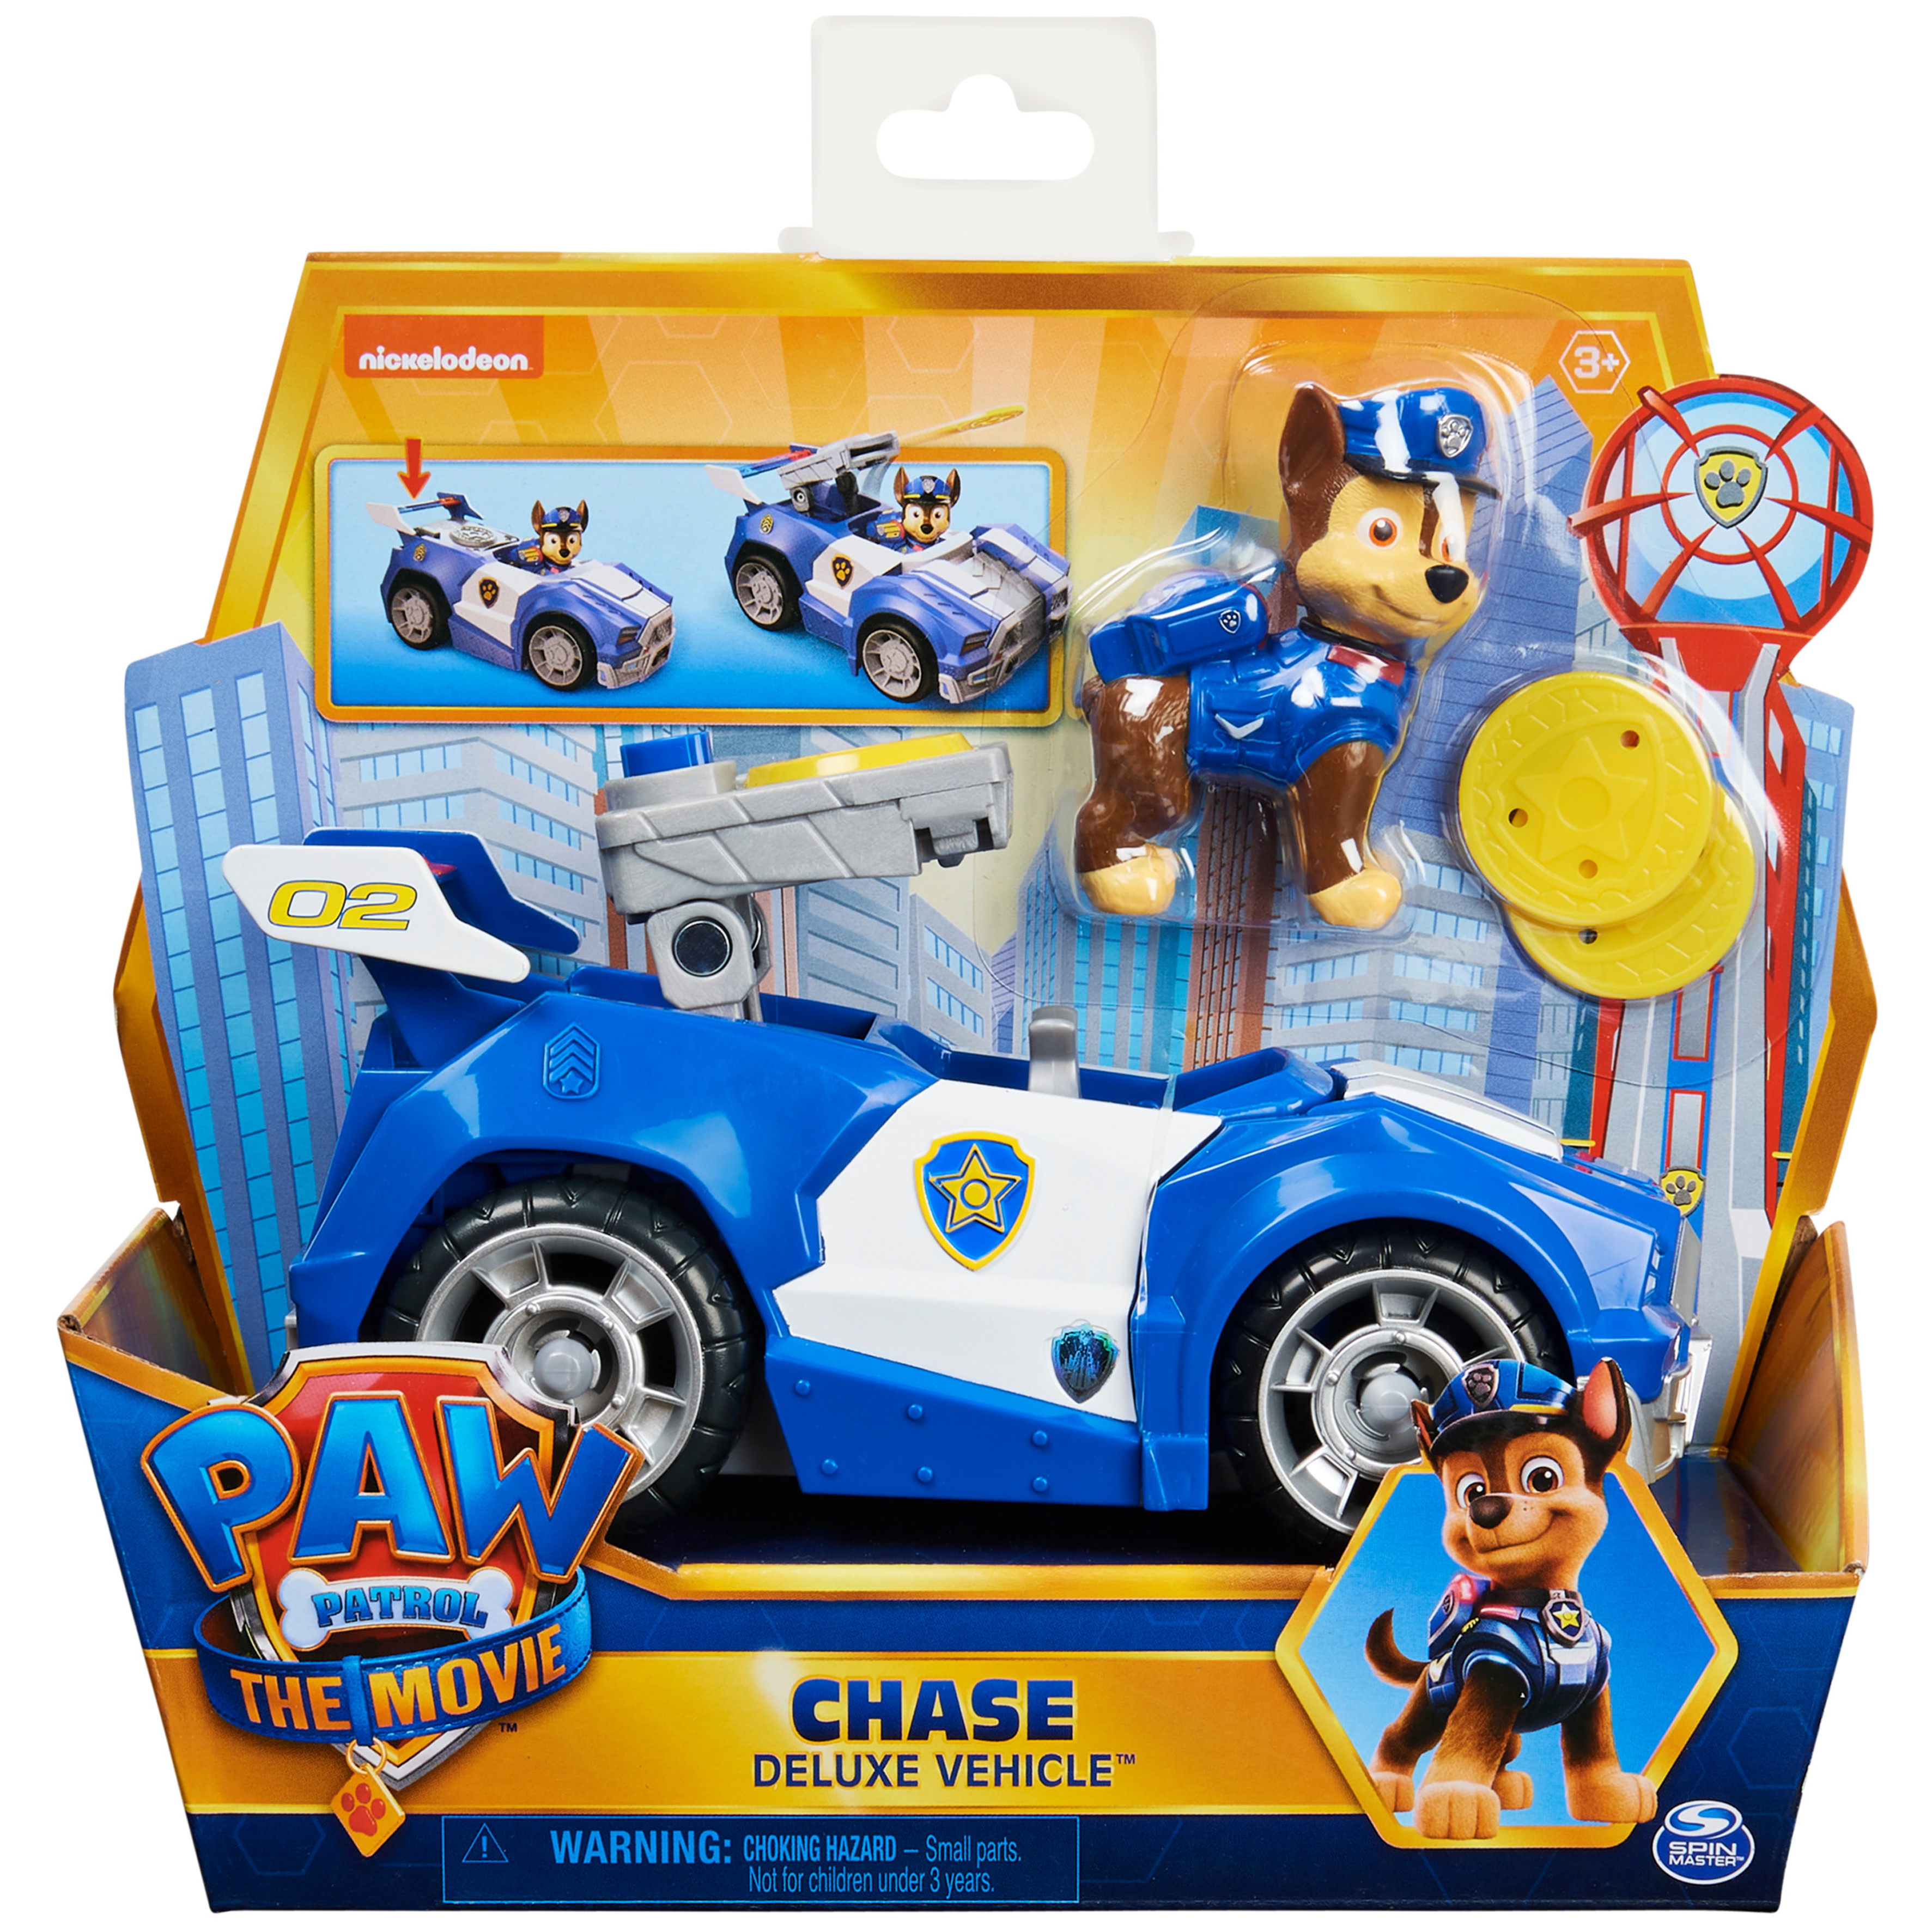 PAW Patrol, Chase Deluxe Transforming Movie Vehicle - image 3 of 8